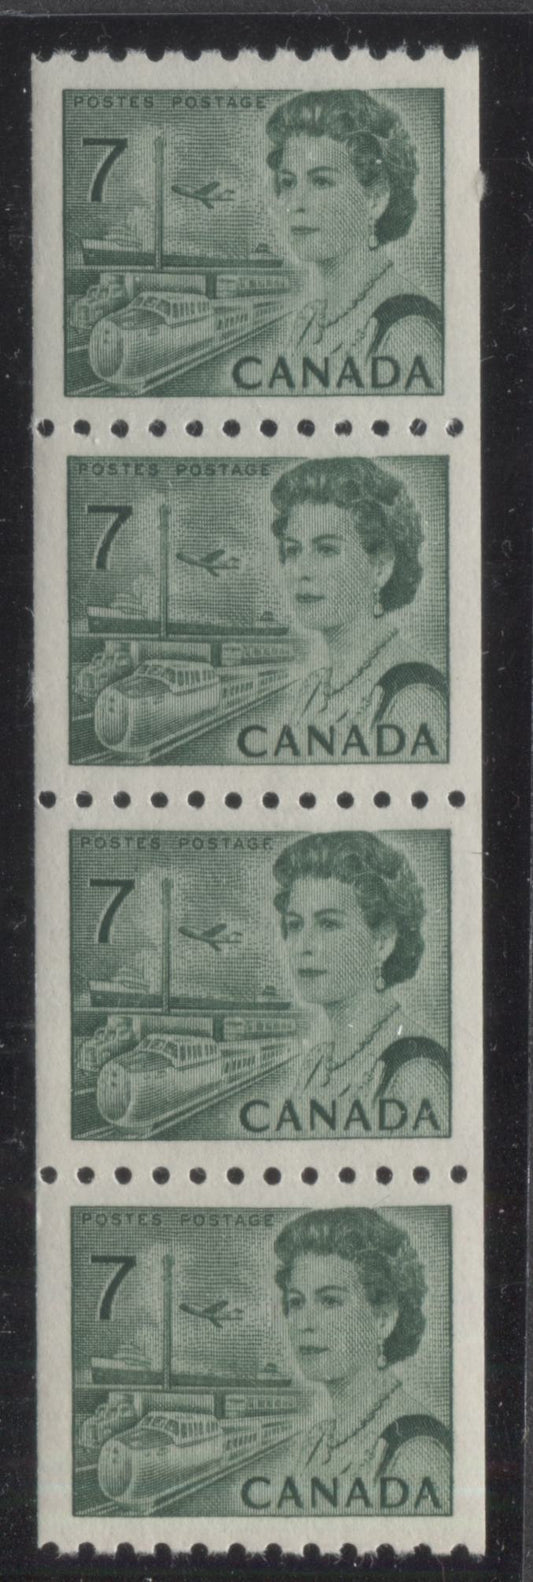 Lot 87 Canada #549 7c Green Queen Elizabeth II, 1967-1973 Centennials, A VFNH Coil Strip Of 4 On Bright White HB10 Paper With Streaky Dex Gum, Black On Light Blue Under UV, Narrow Spacing Between 1/2